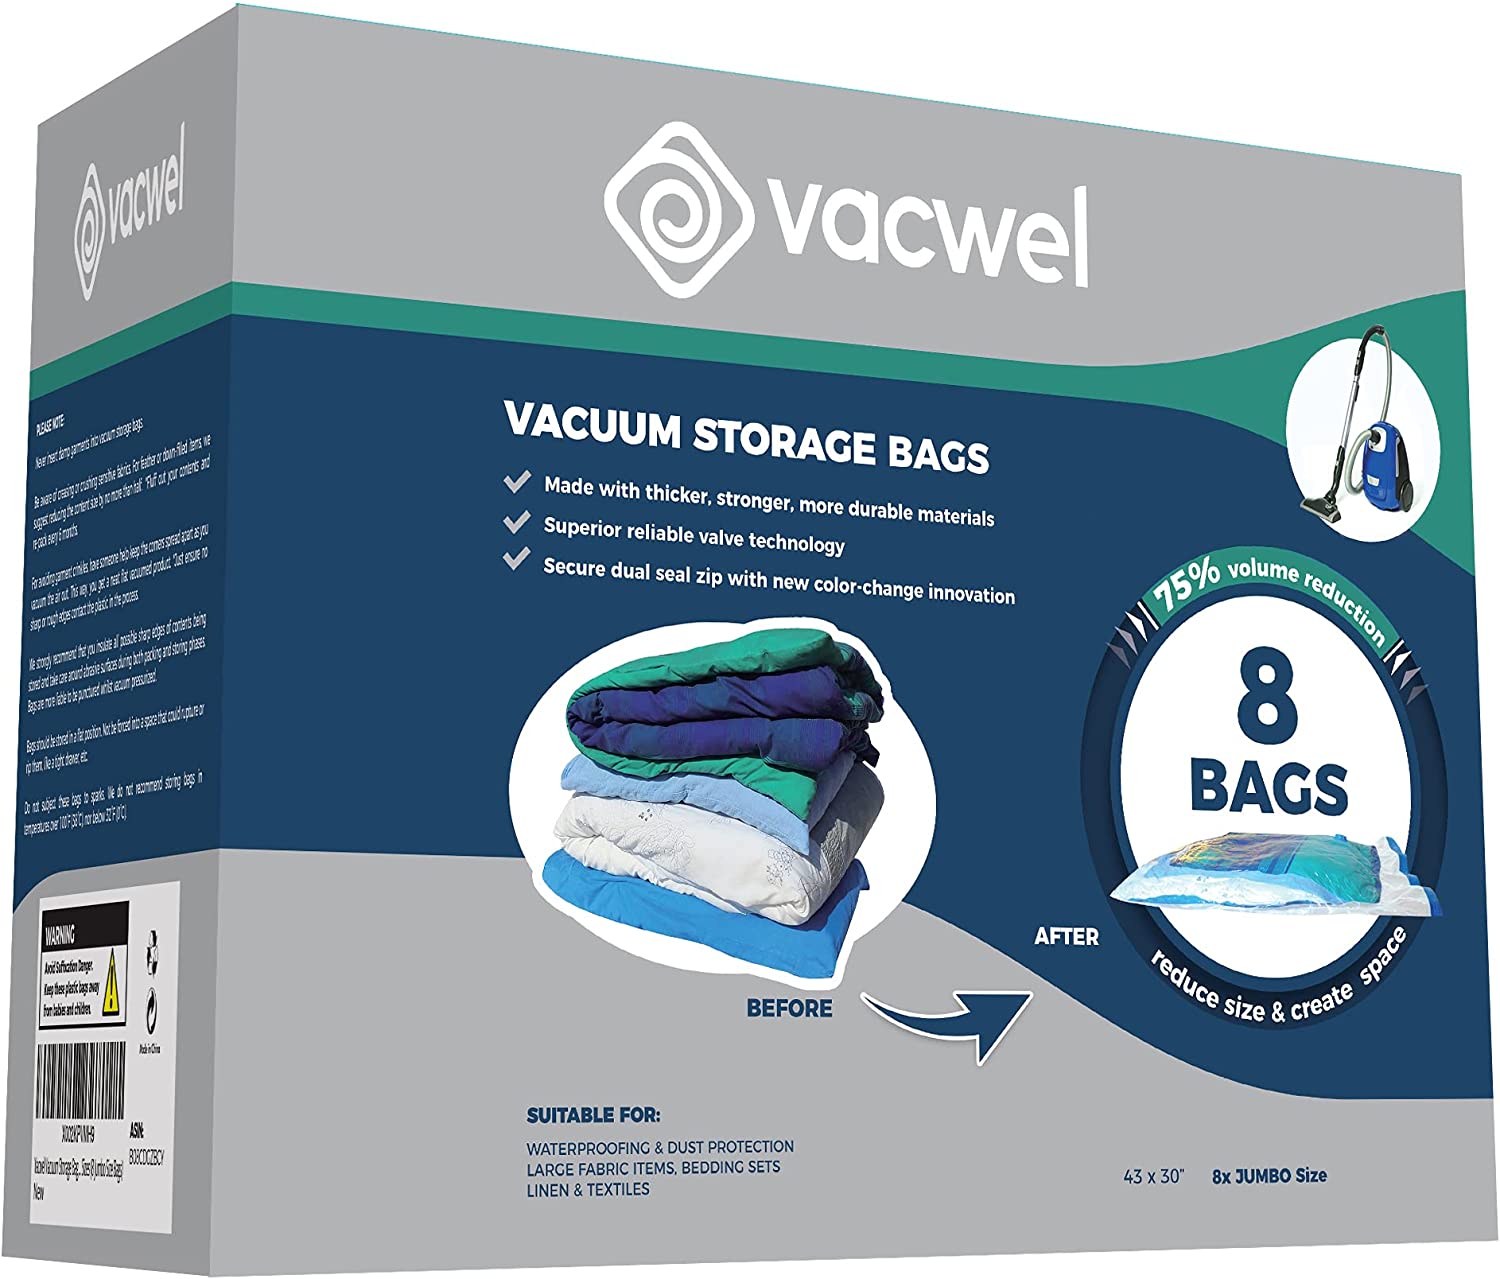 Vacwel Vacuum Storage Bags for Clothes, Pillows, Bedding, Moving